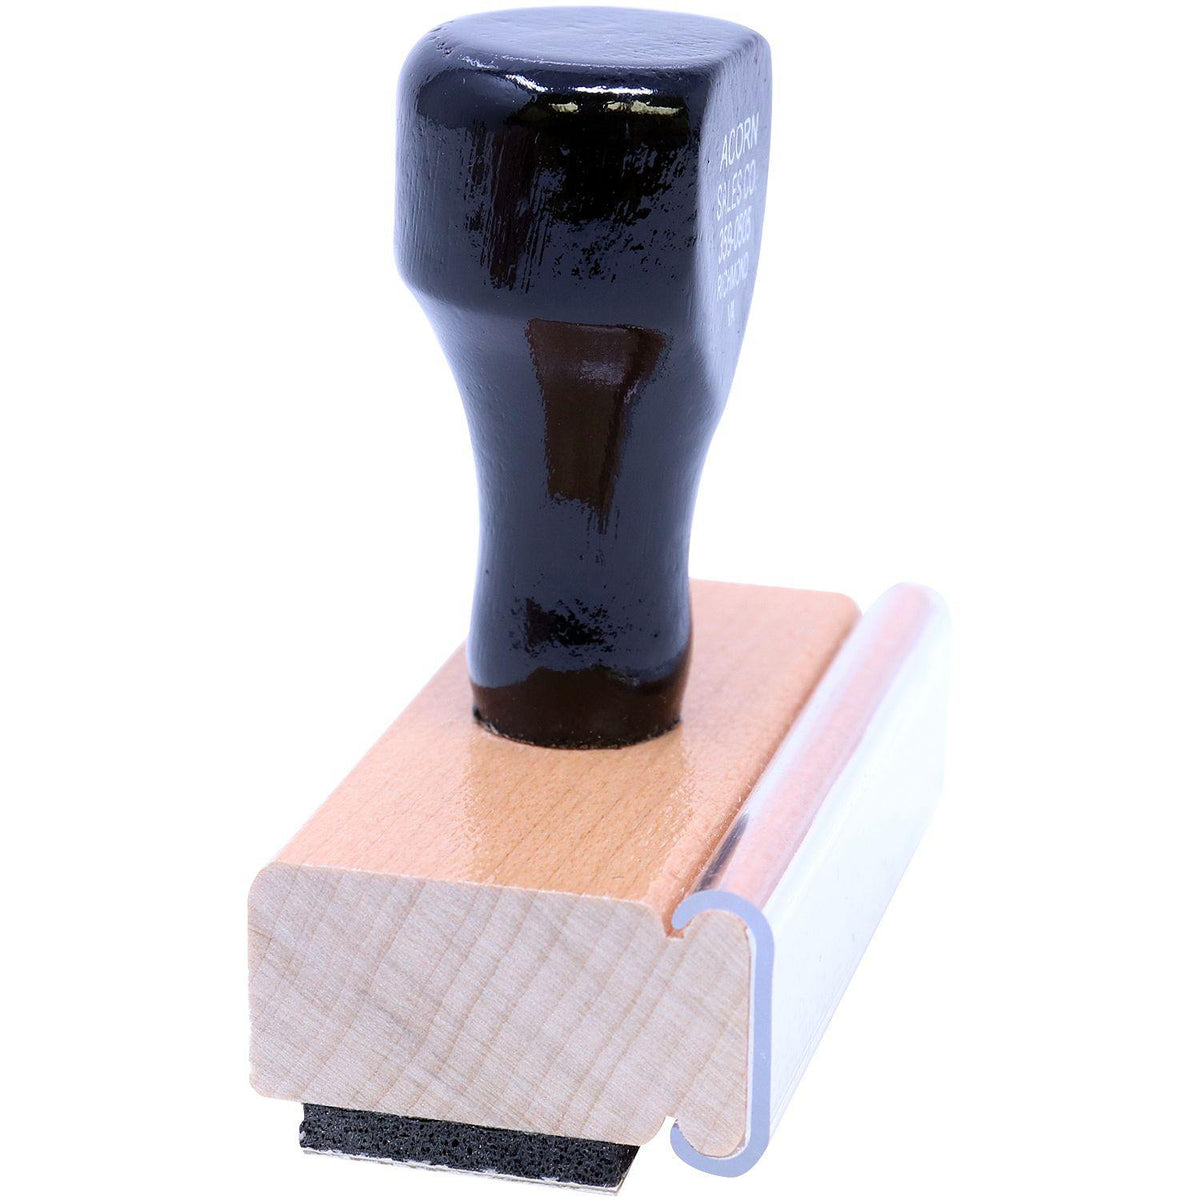 Side View of Large Narrow Copy for your Information Rubber Stamp at an Angle